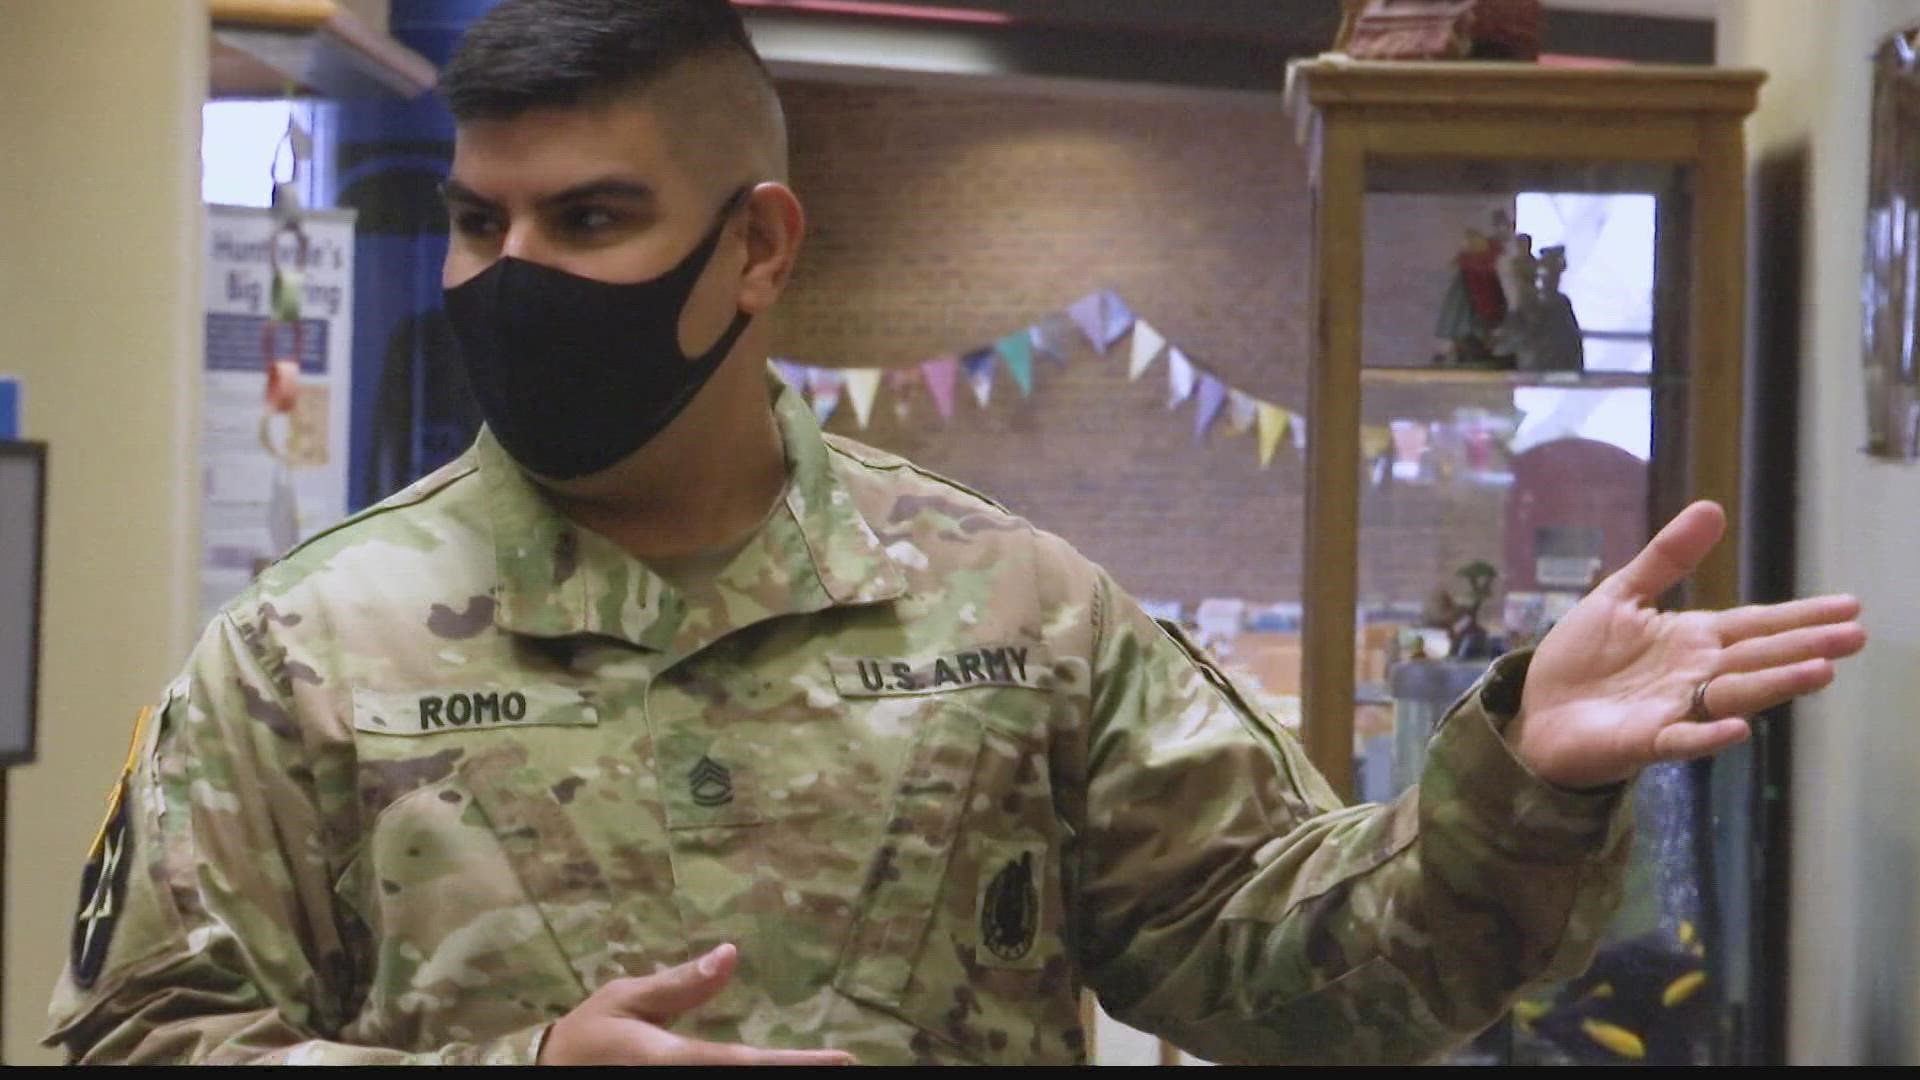 Rosie's International Services has named a local sergeant here in the valley "Soldier of the Year".